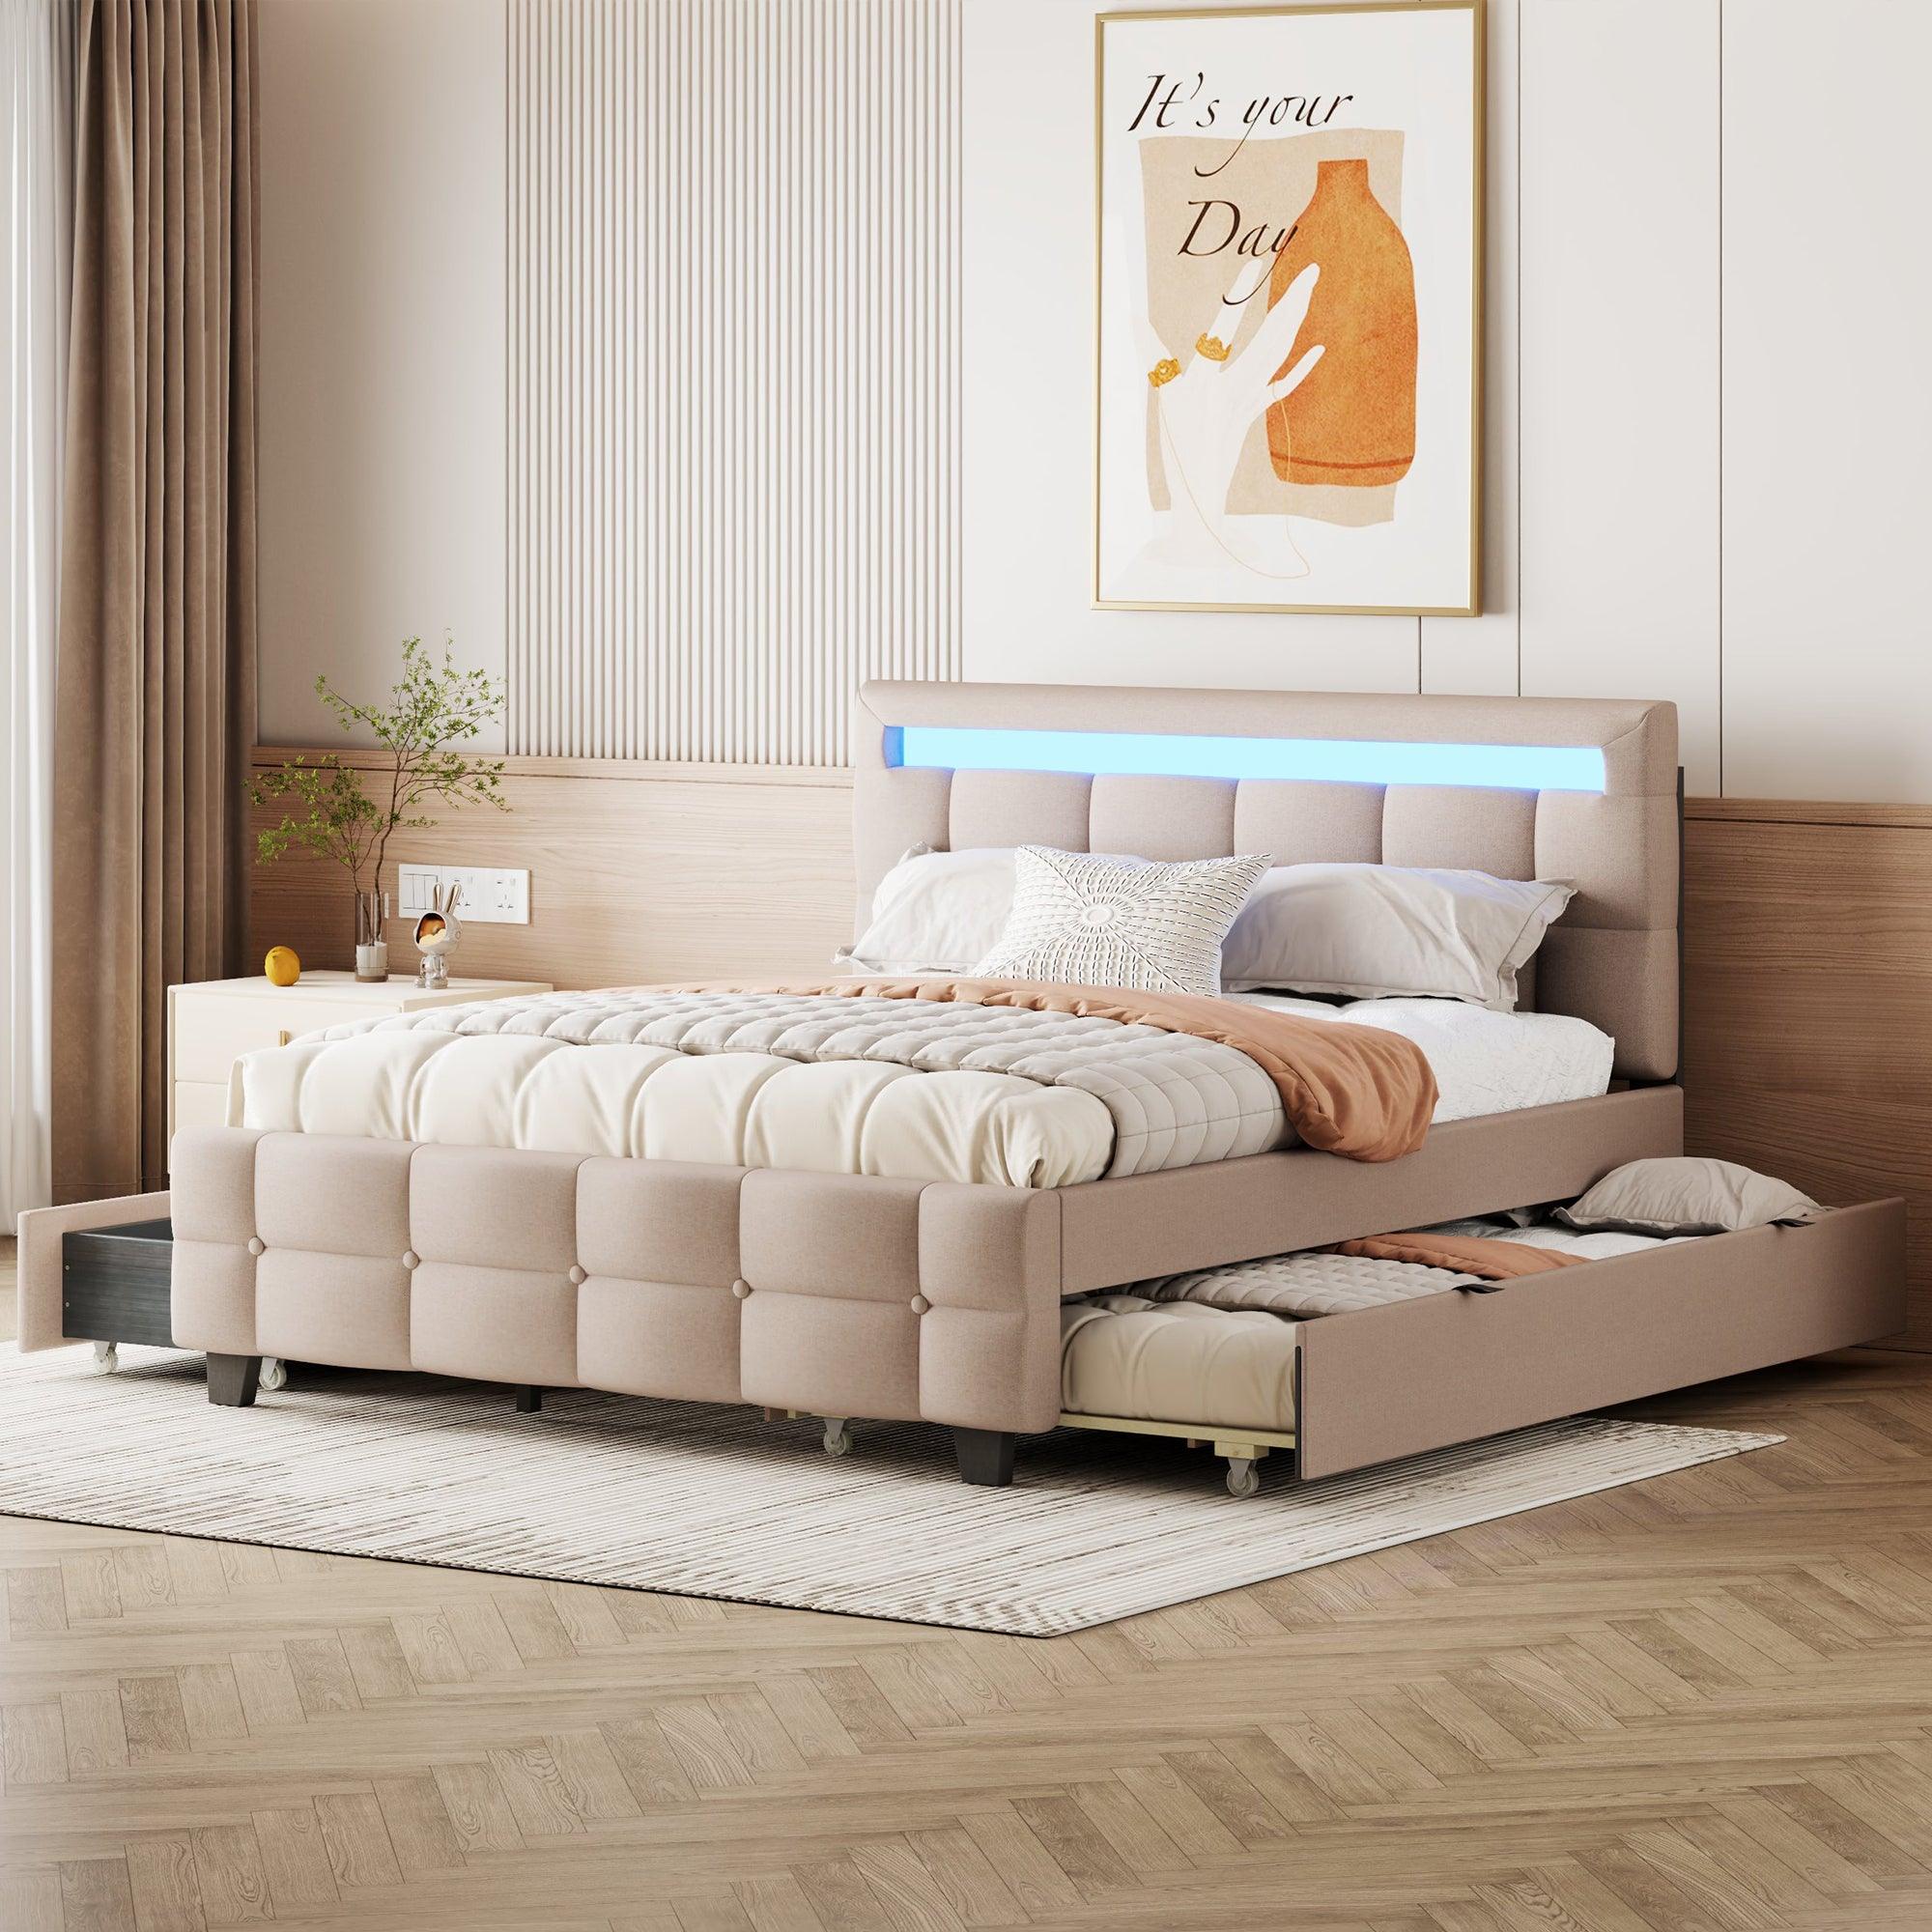 🆓🚛 Queen Size Upholstered Platform Bed With Led Frame, With Twin Xl Size Trundle & 2 Drawers, Linen Fabric, Beige